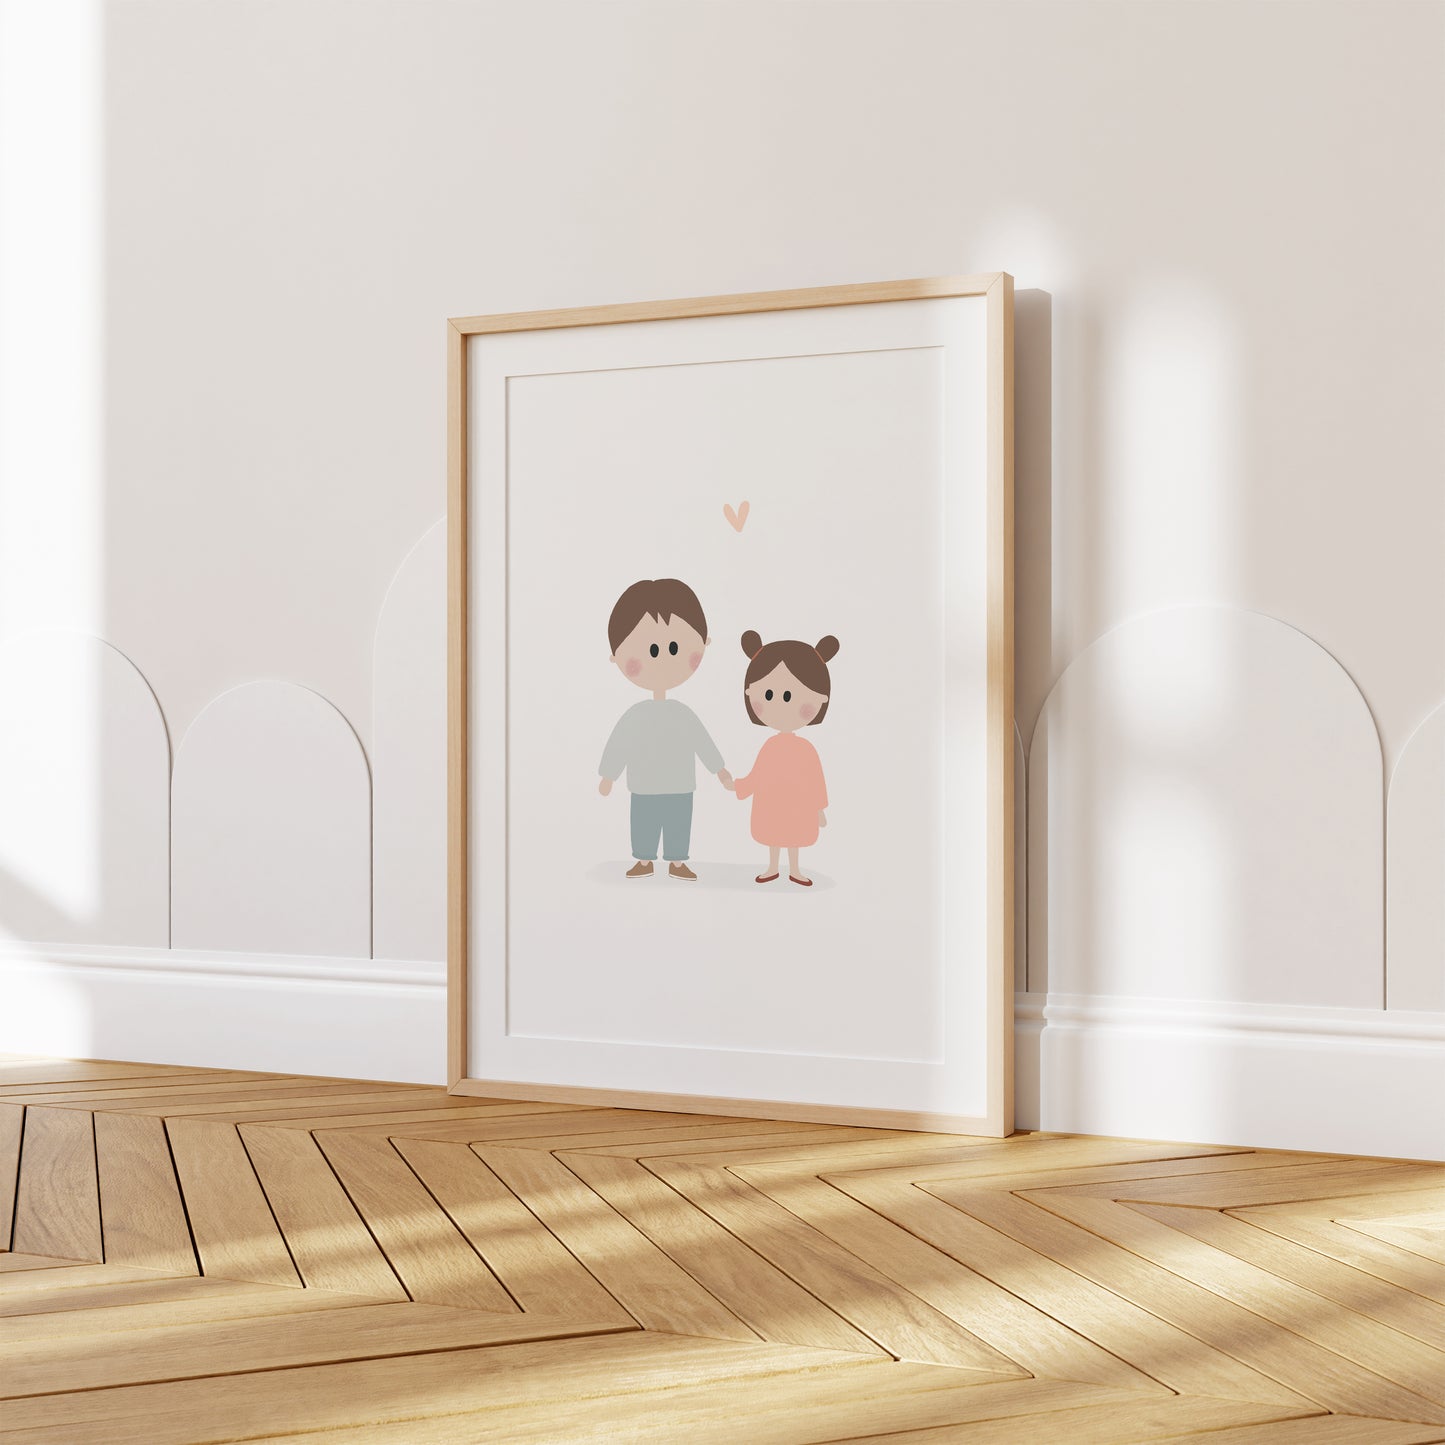 A beautifully illustrated art print featuring a little brother and his younger sister. This poster certainly brings joy and tenderness to your walls with soft pastel colors.